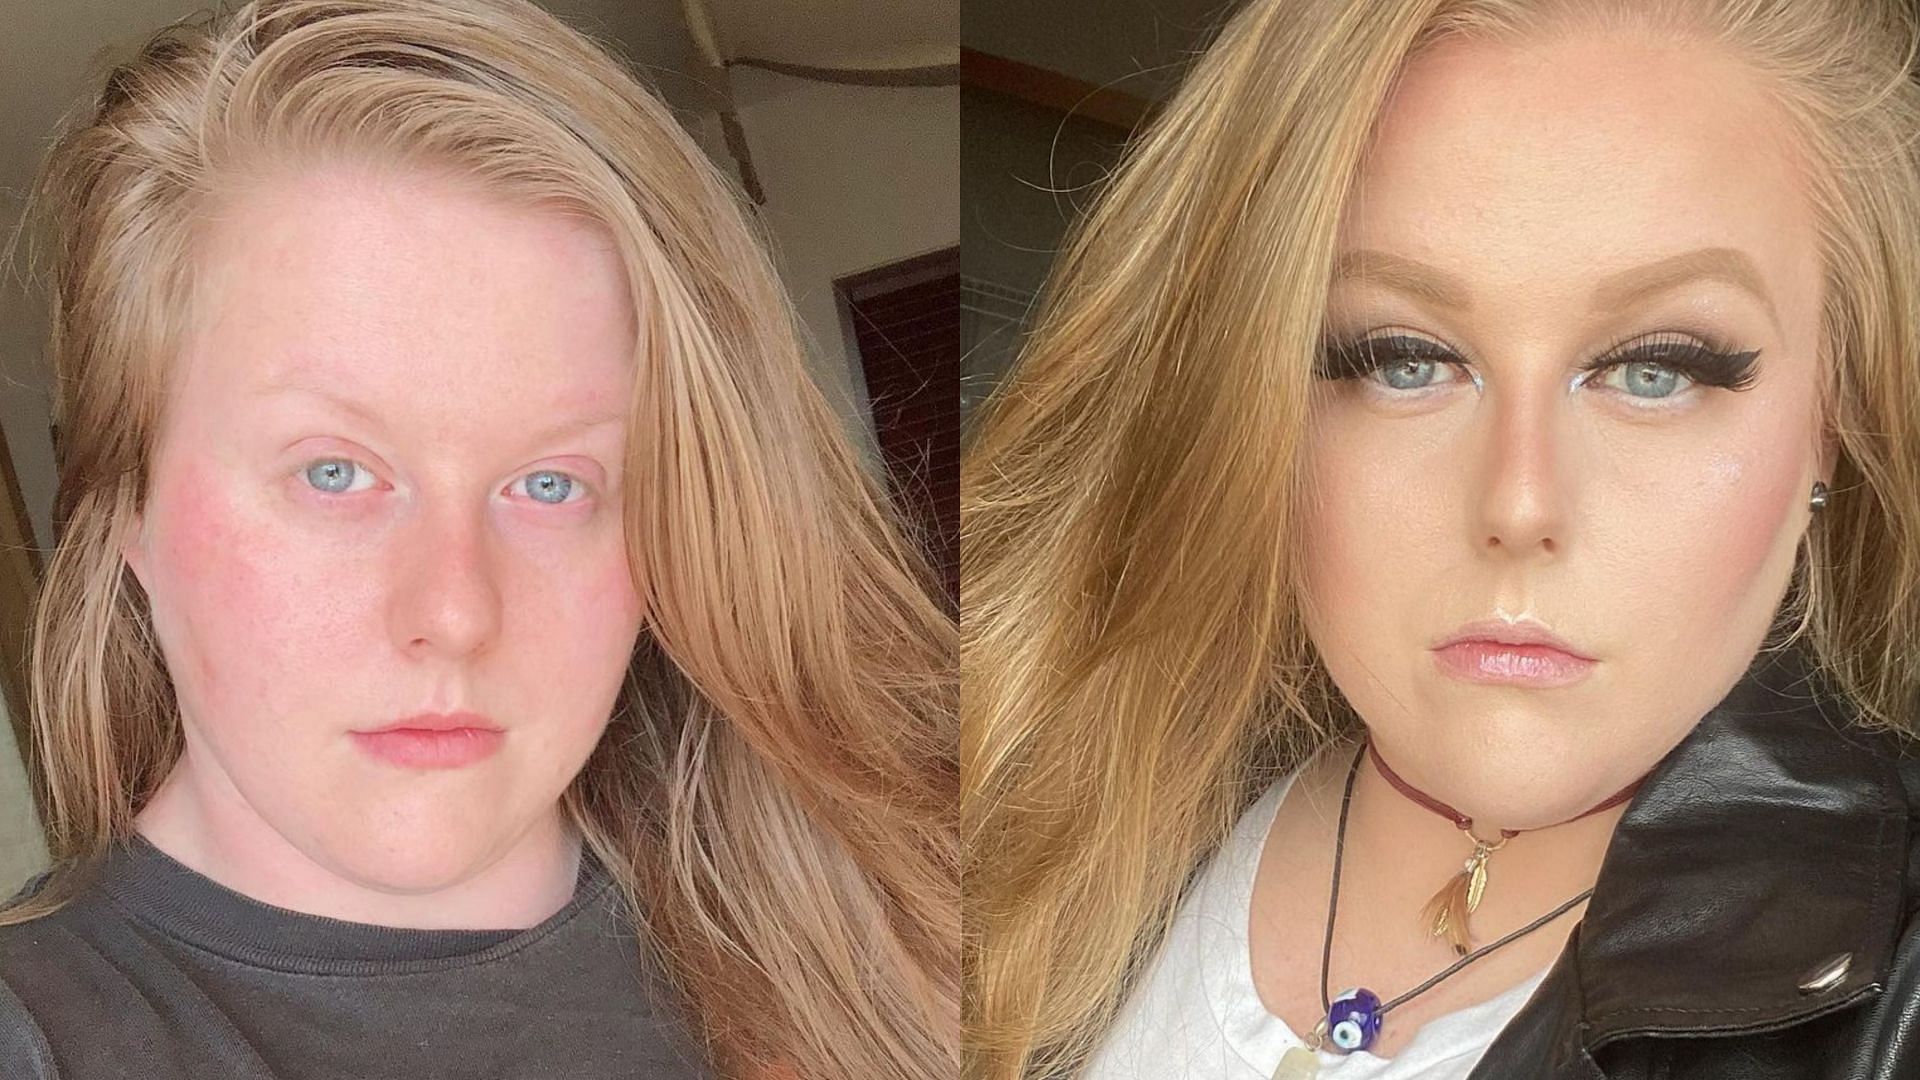 Doudrop without makeup (left) and with makeup (right)